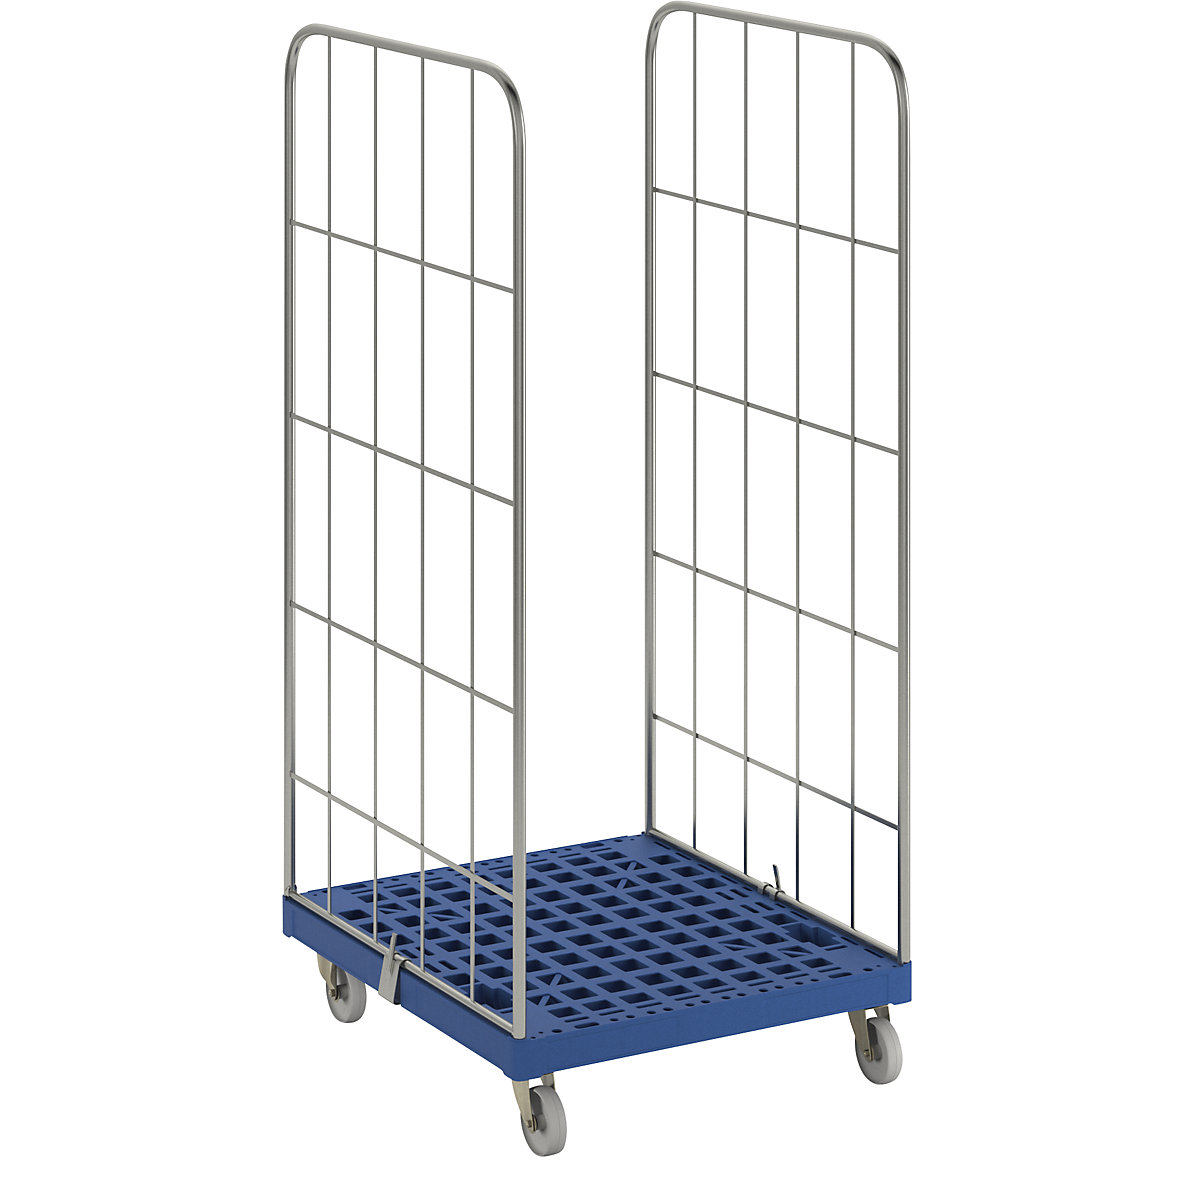 MODULAR roll container, plastic transport dolly, mesh on 2 sides, dark blue dolly-14